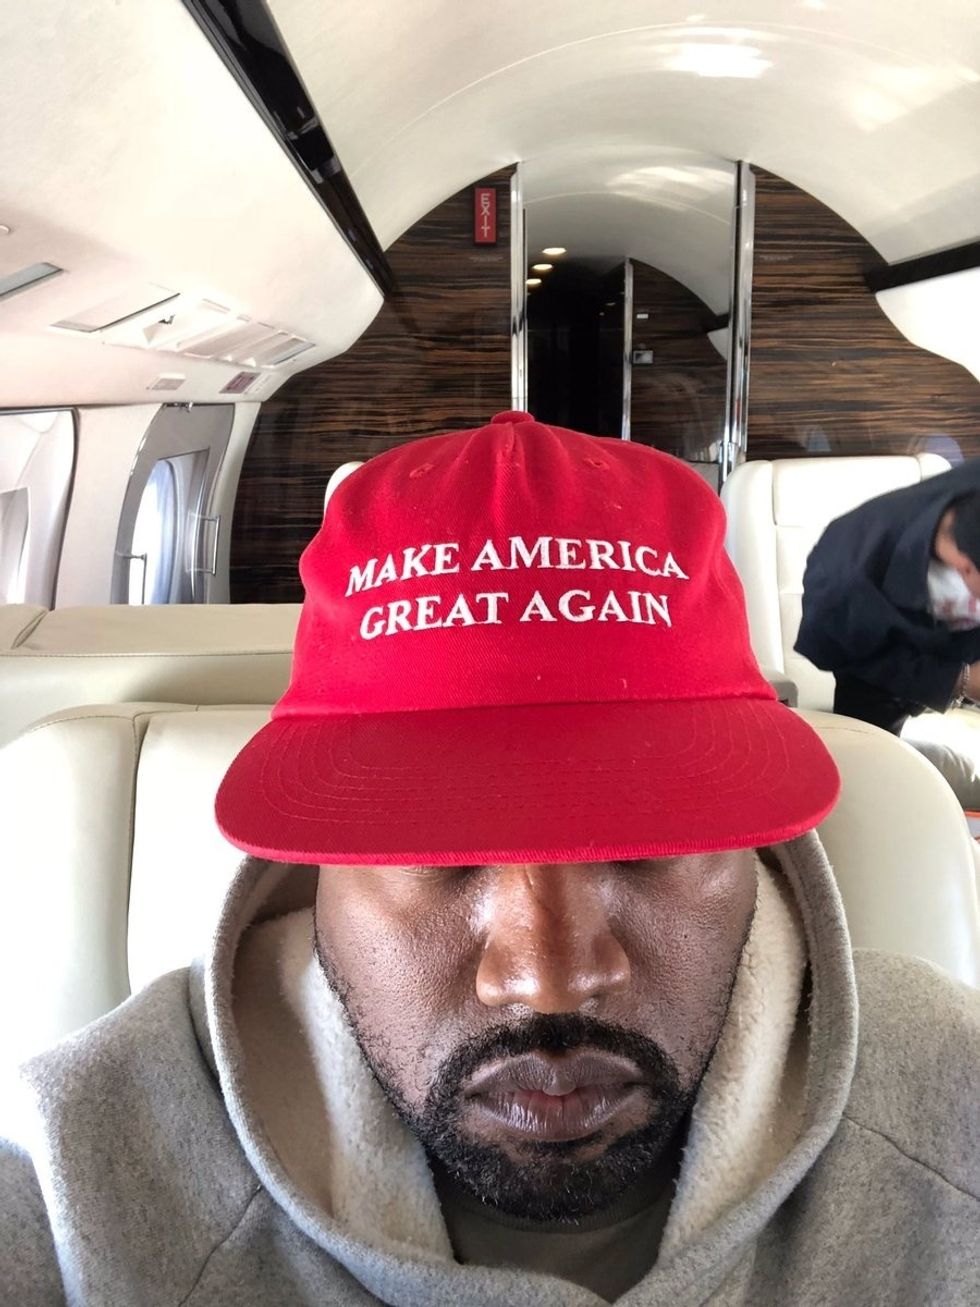 Kanye West's 13th Amendment Tweet Is Just As Valid As Any Hate Speech In The Land Of Liberty